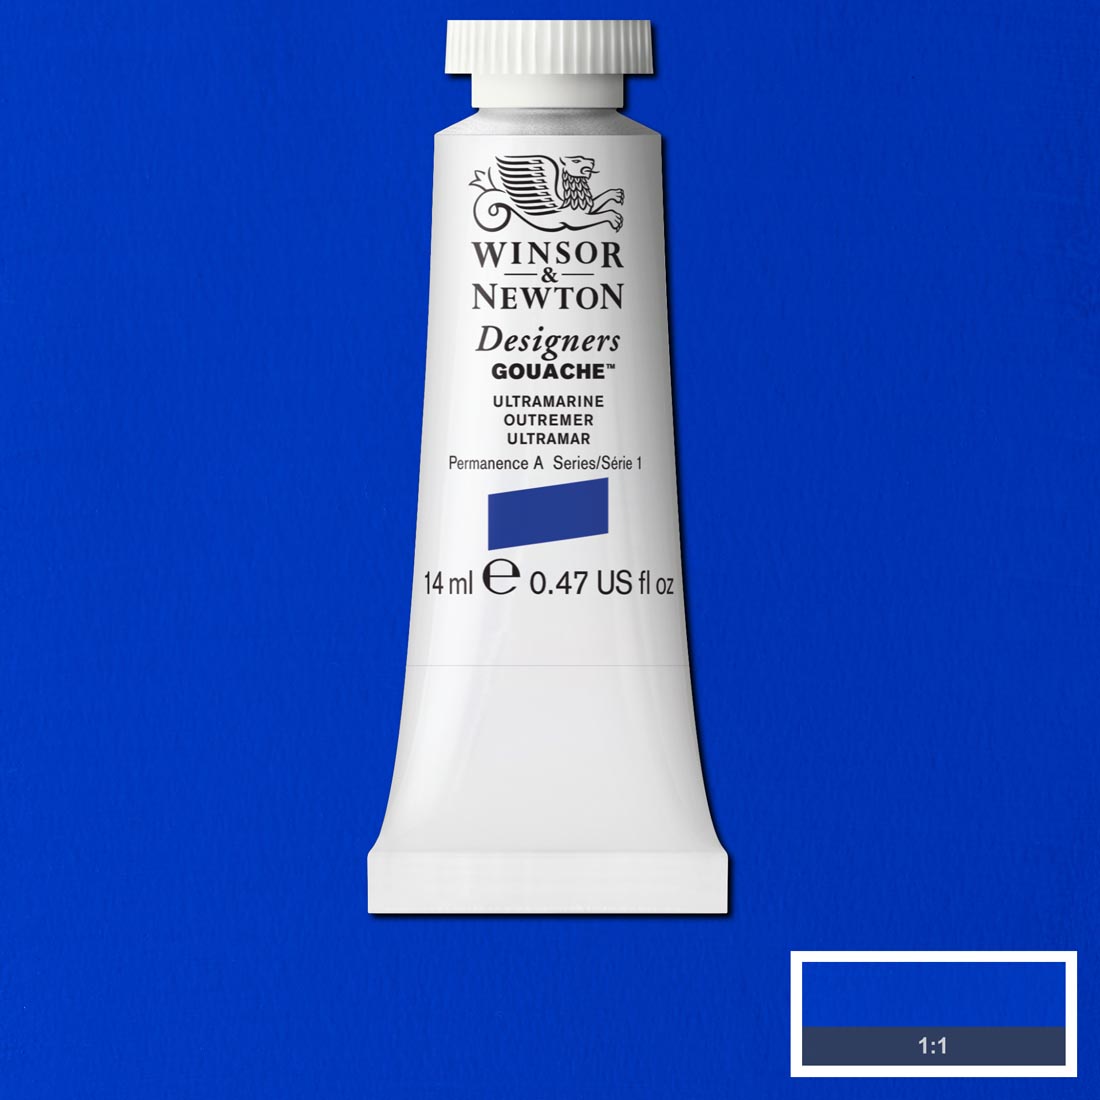 Tube of Ultramarine Winsor & Newton Designers Gouache with a paint swatch for the background